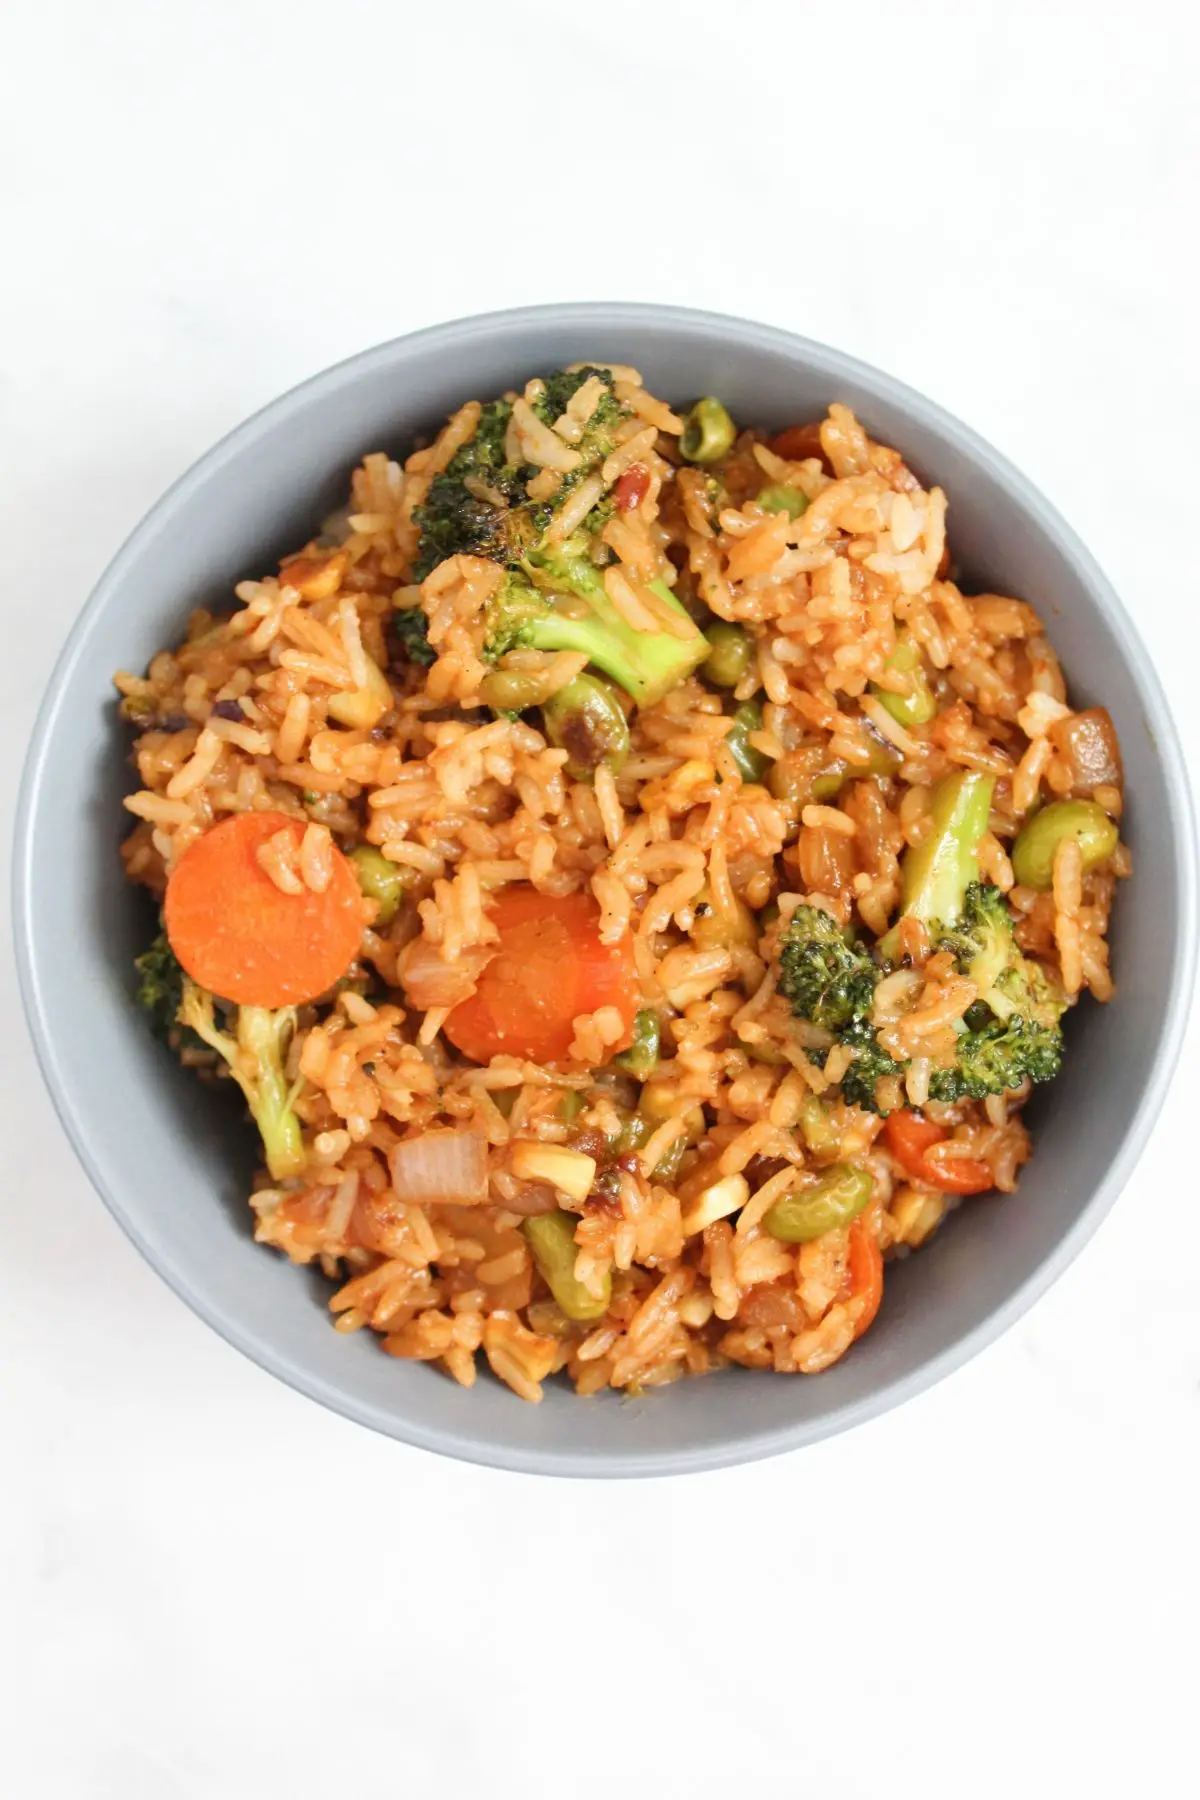 top down view of finished vegan fried rice with broccoli, carrots, and other veggies